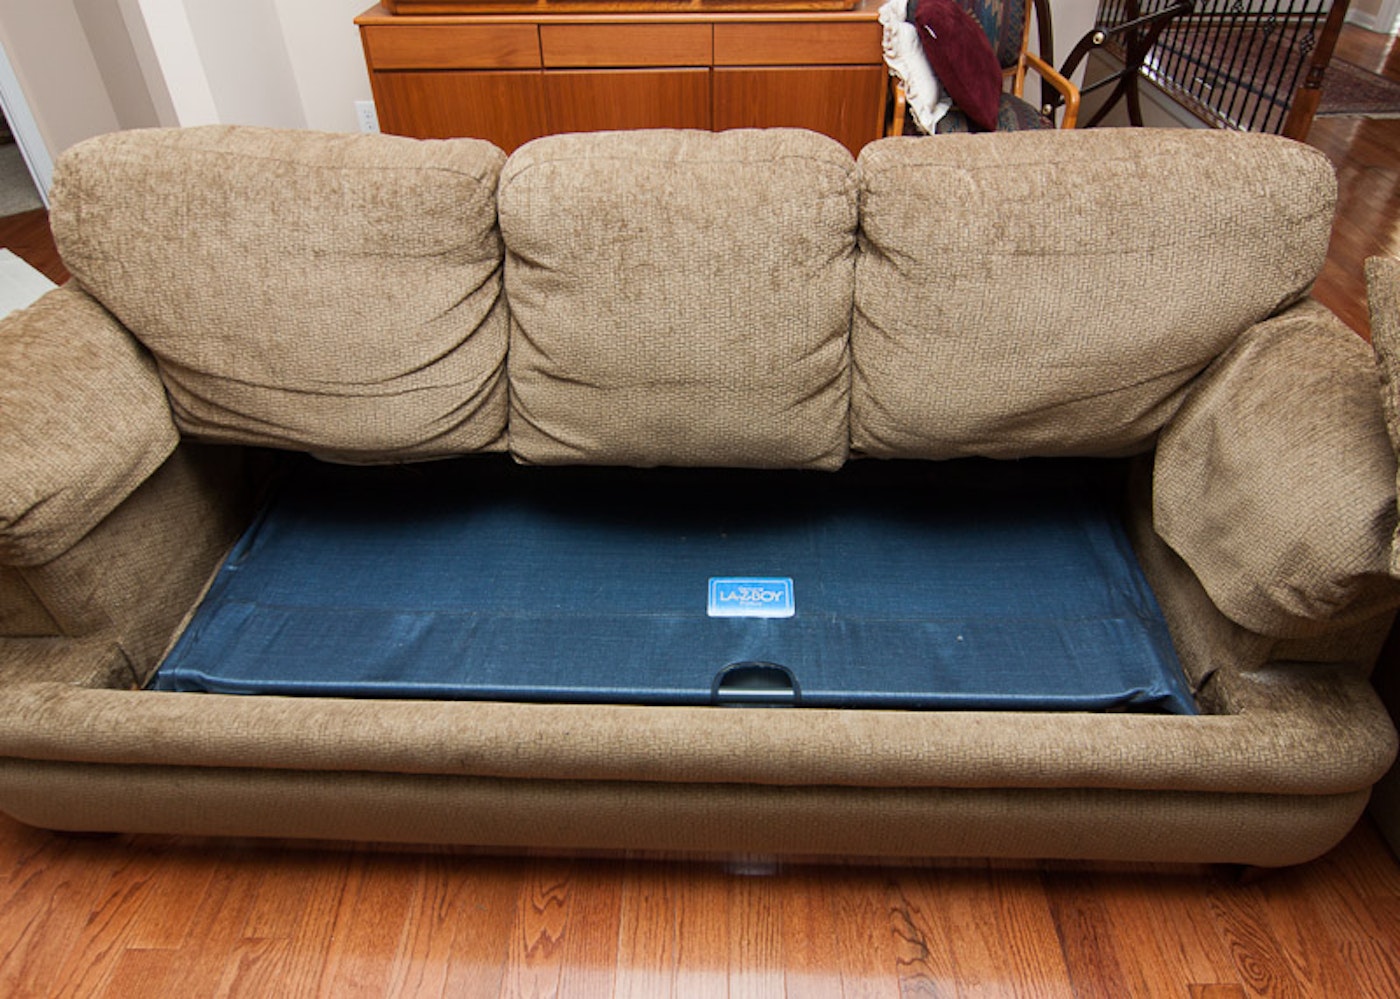 lazyboy small sofa bed